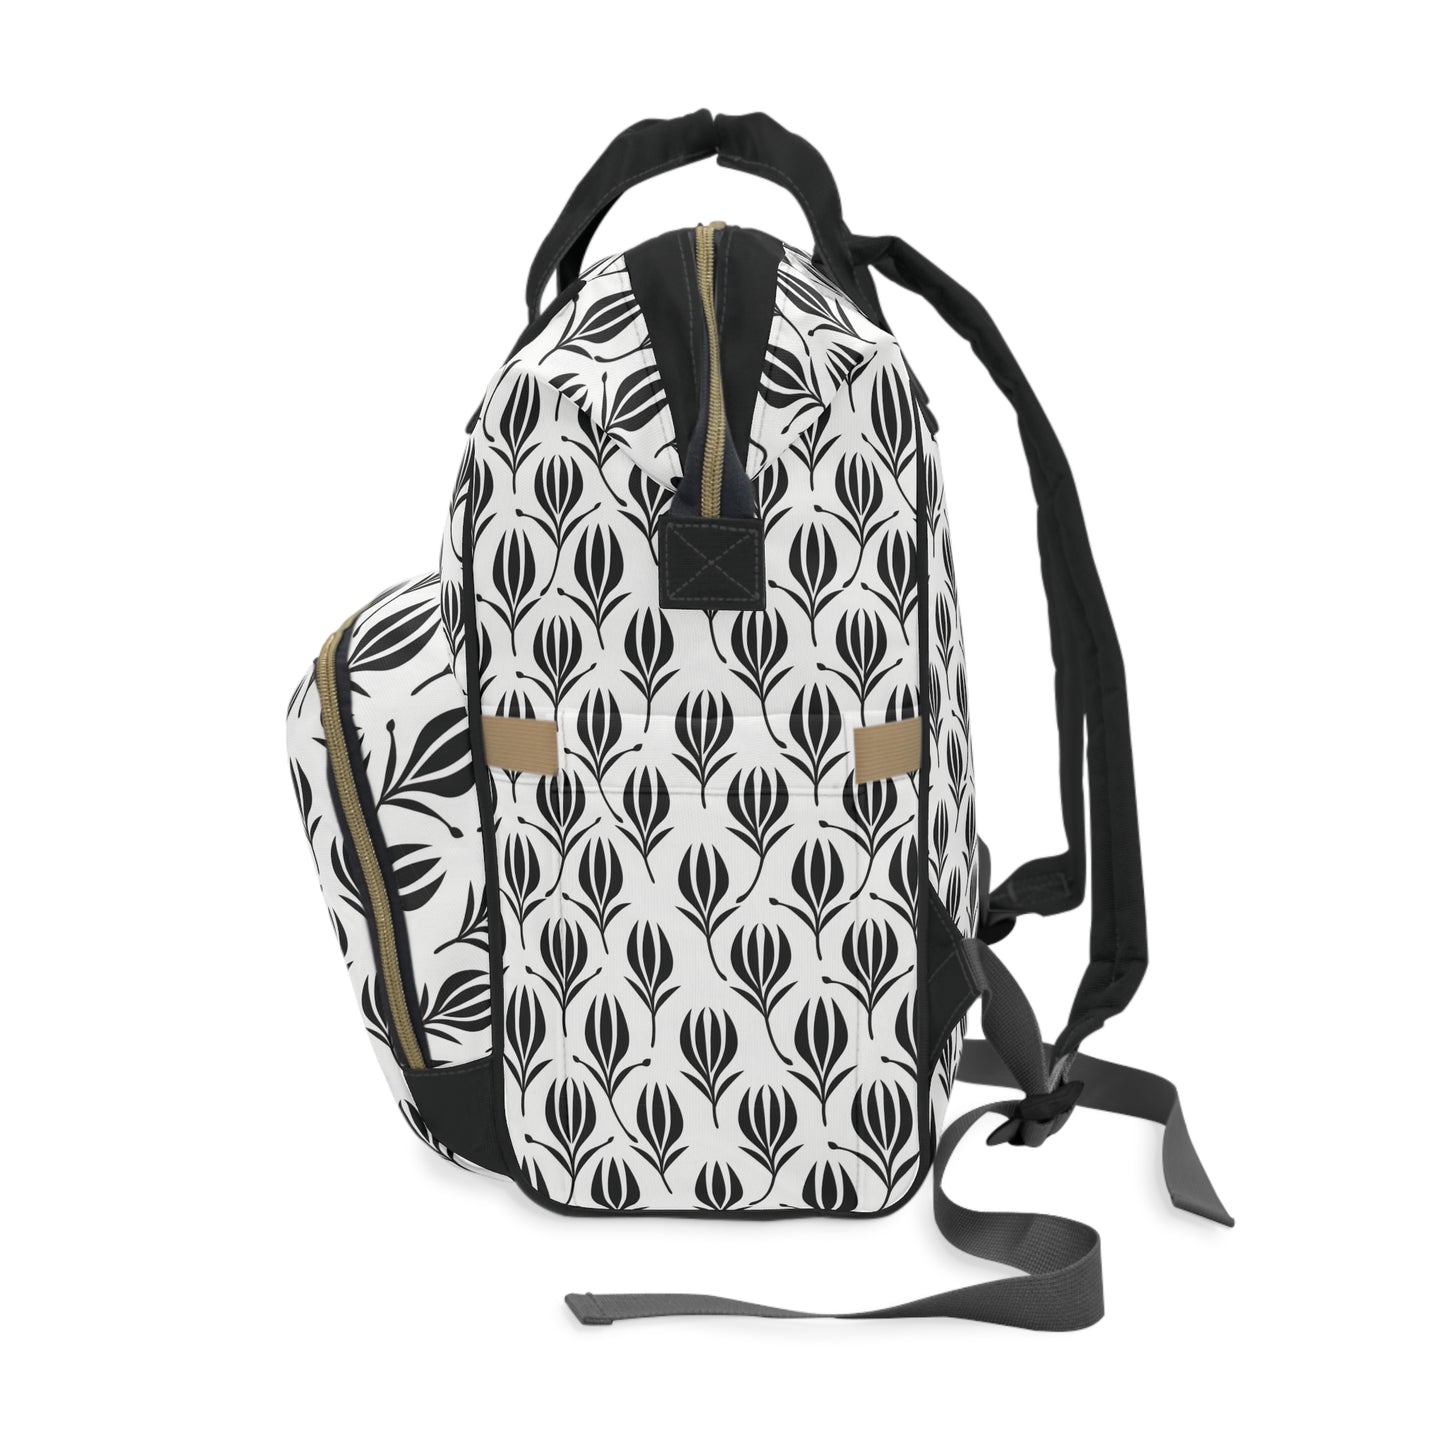 Multifunctional Monochrome Tulip Backpack for Every Adventure